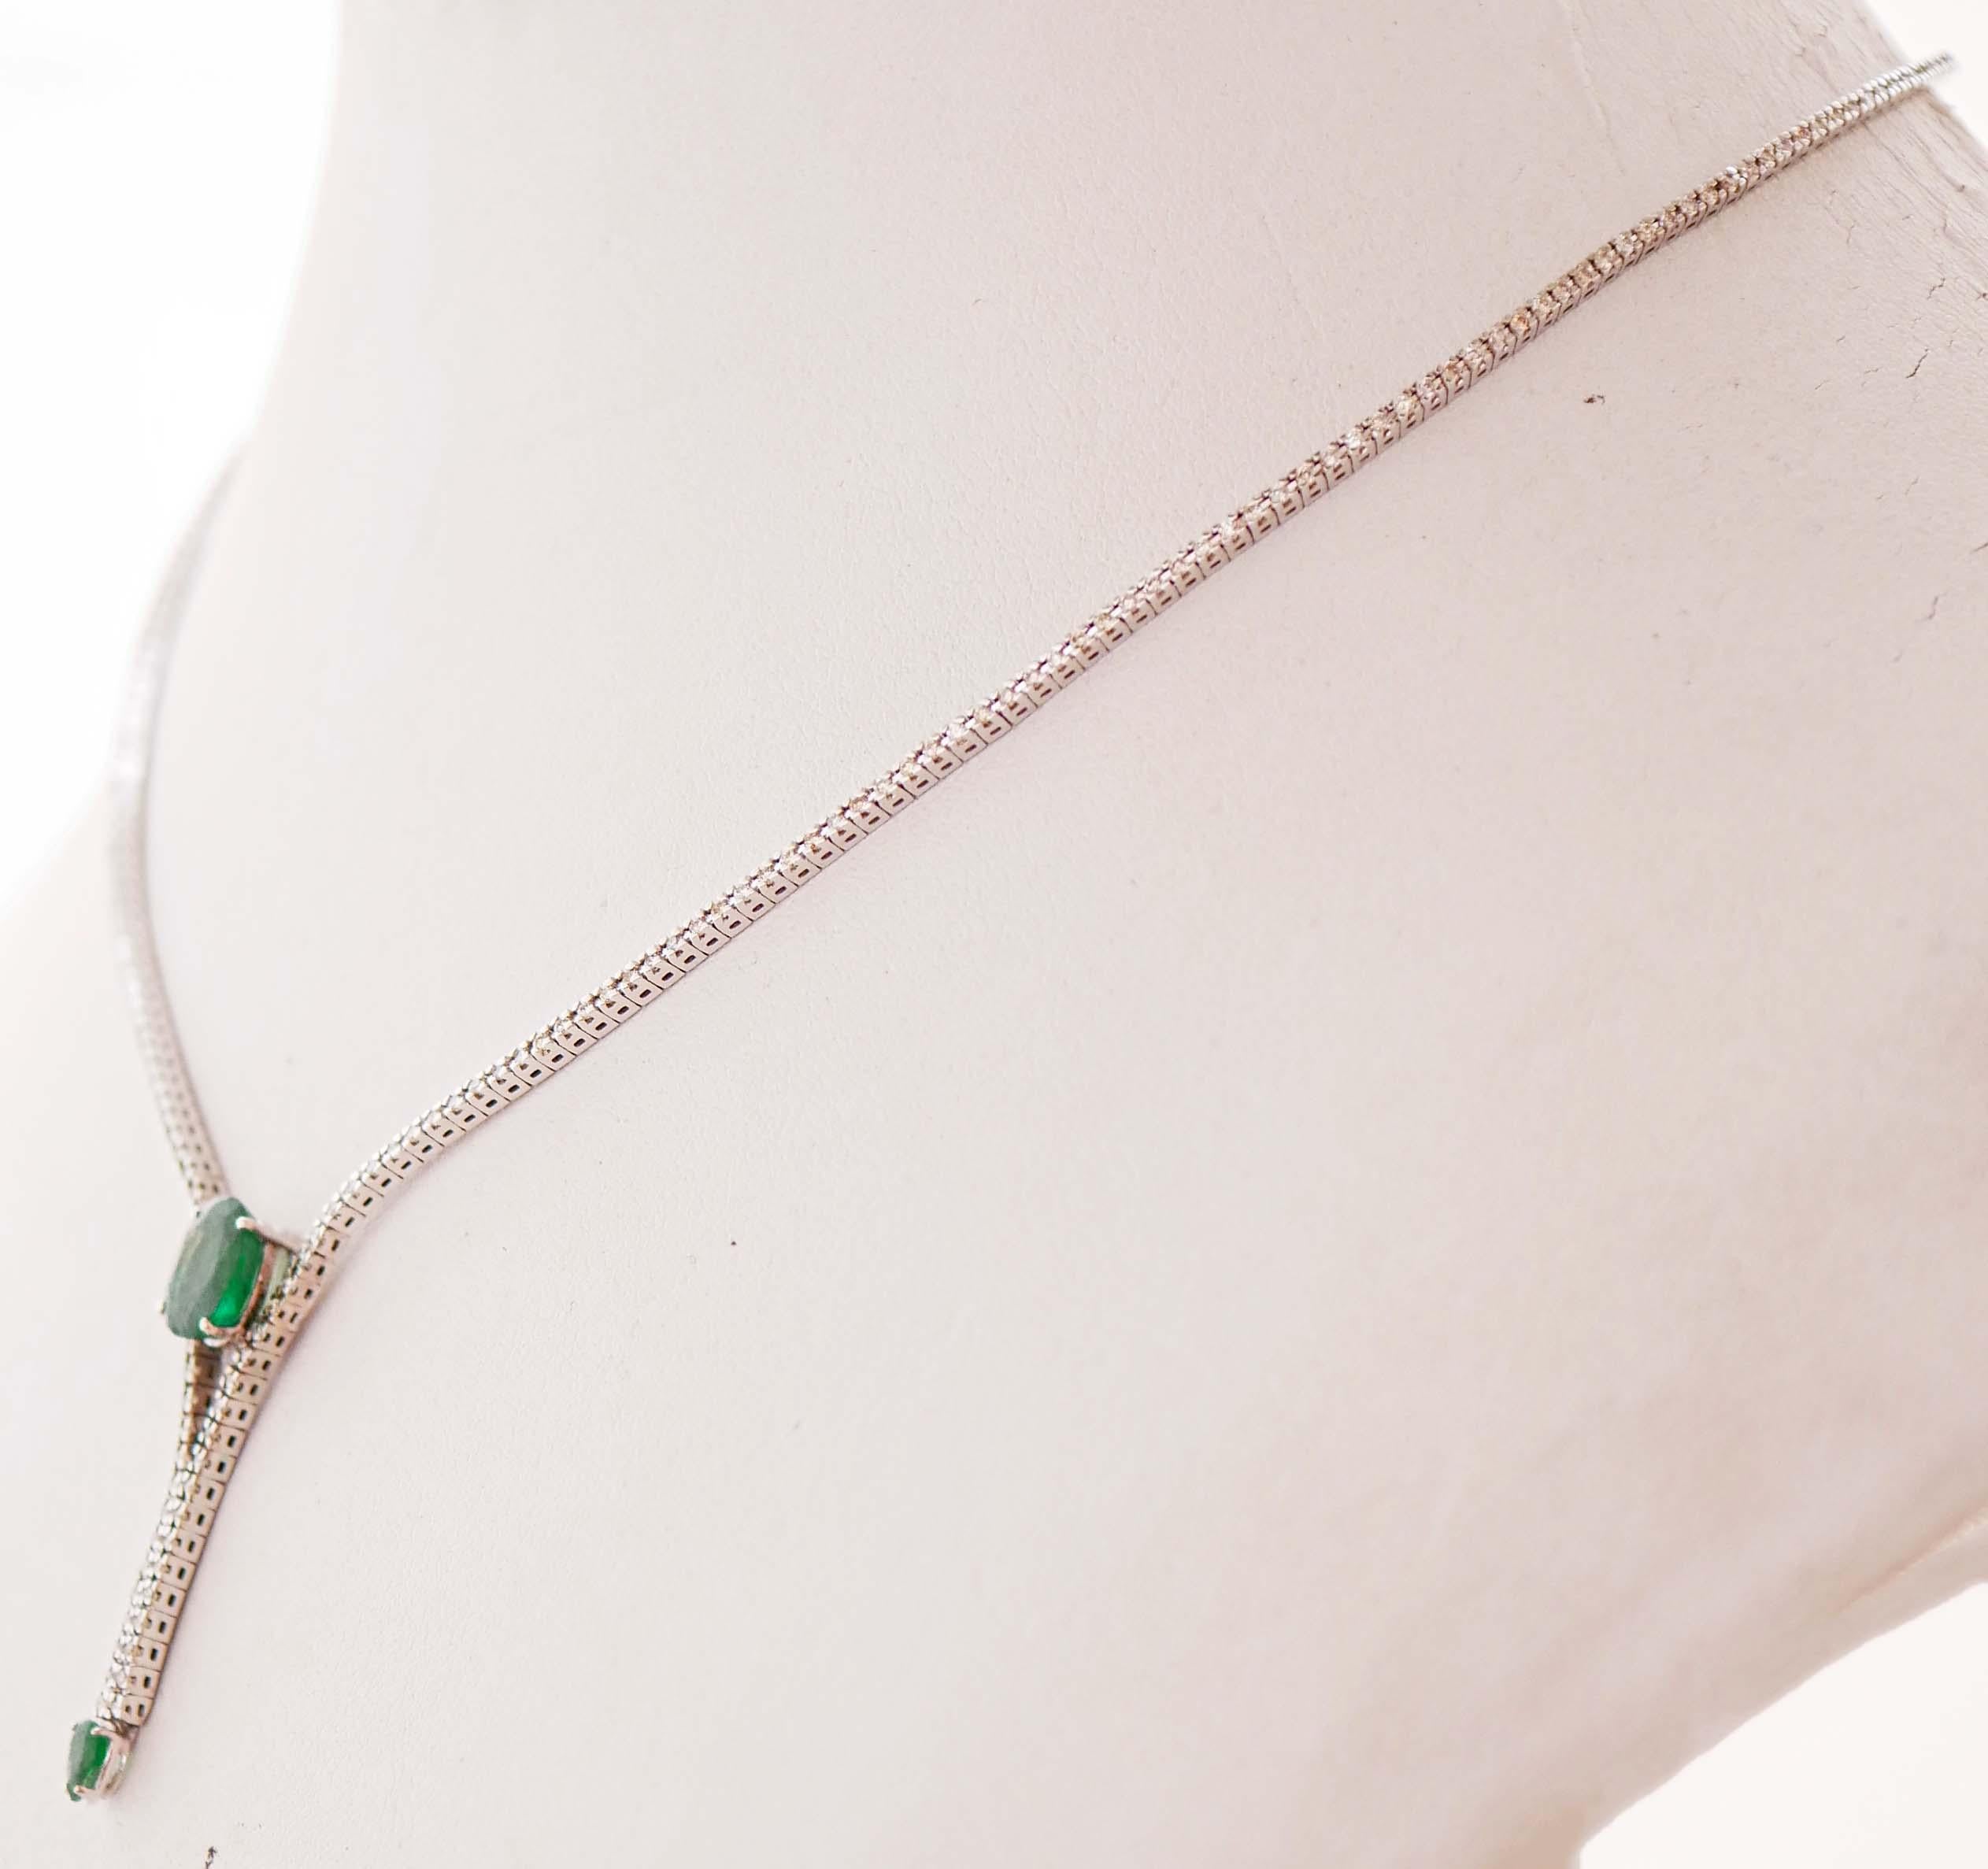 SHIPPING POLICY: 
Shipping costs will be totally covered by the seller-

Elegant tennis necklace in 14 kt white gold structure mounted with diamonds for all the lenght; between two rows of diamonds, an oval emerald ad, as pendant, a drop